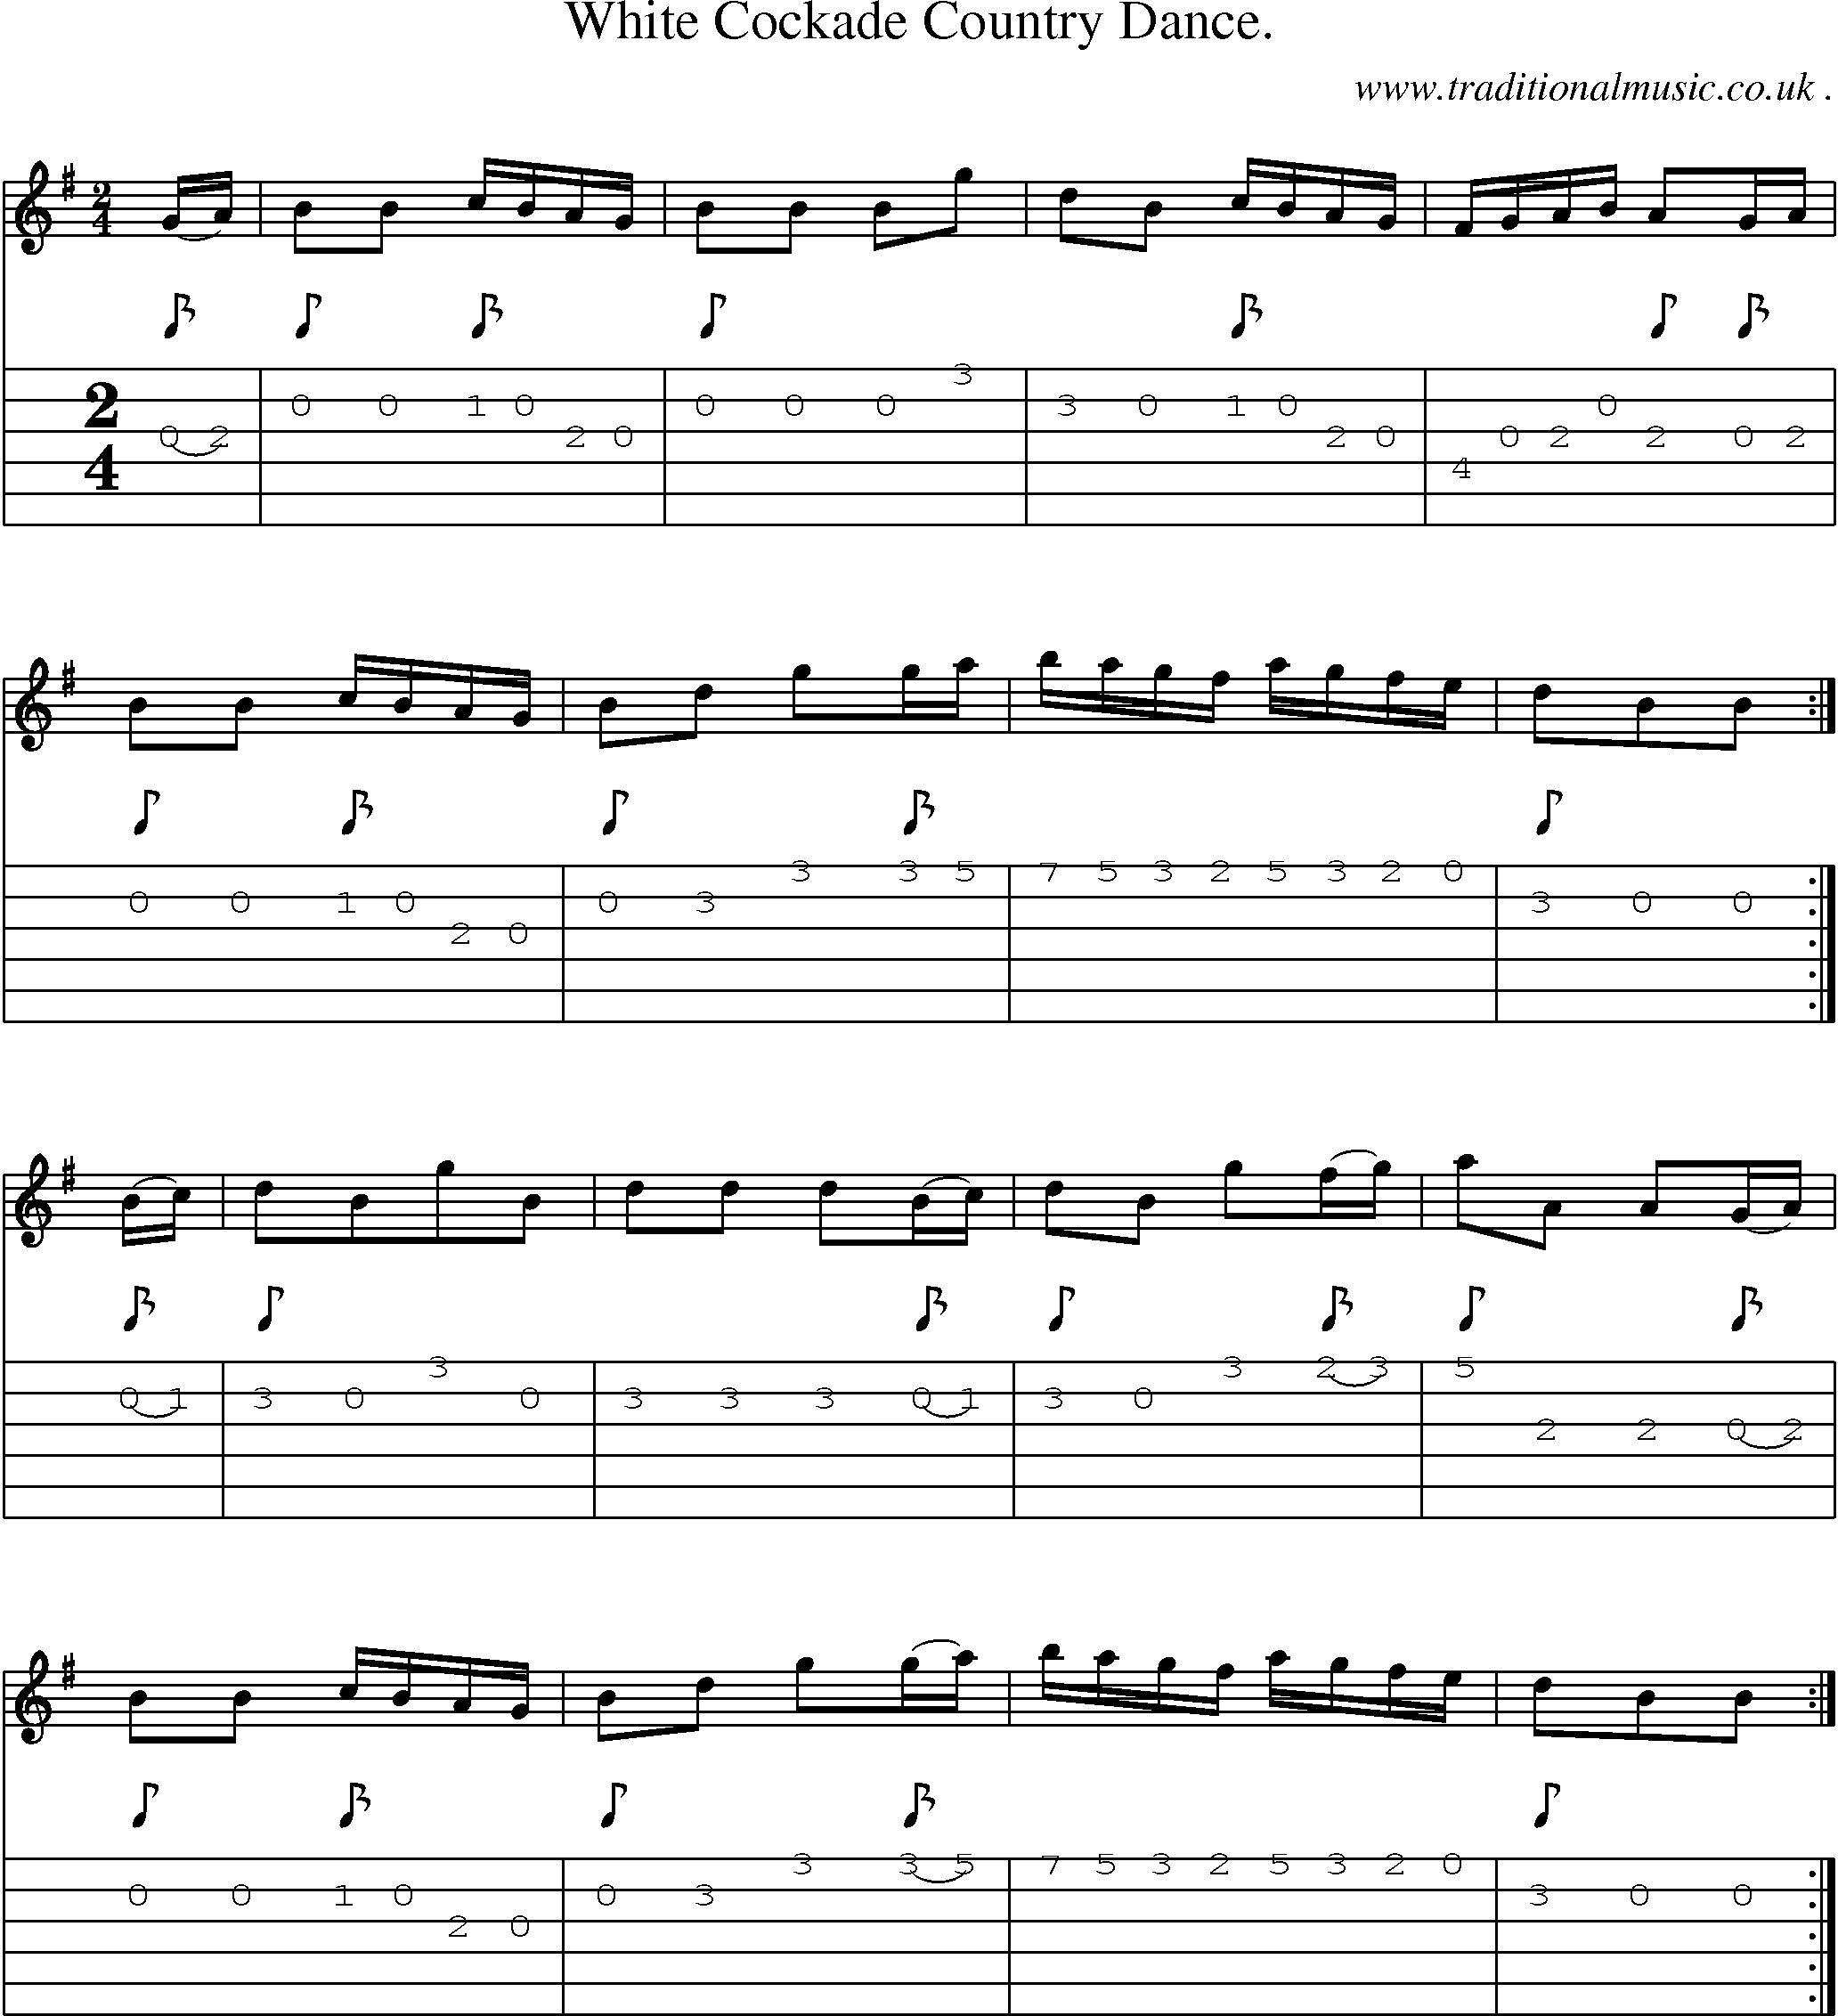 Sheet-Music and Guitar Tabs for White Cockade Country Dance